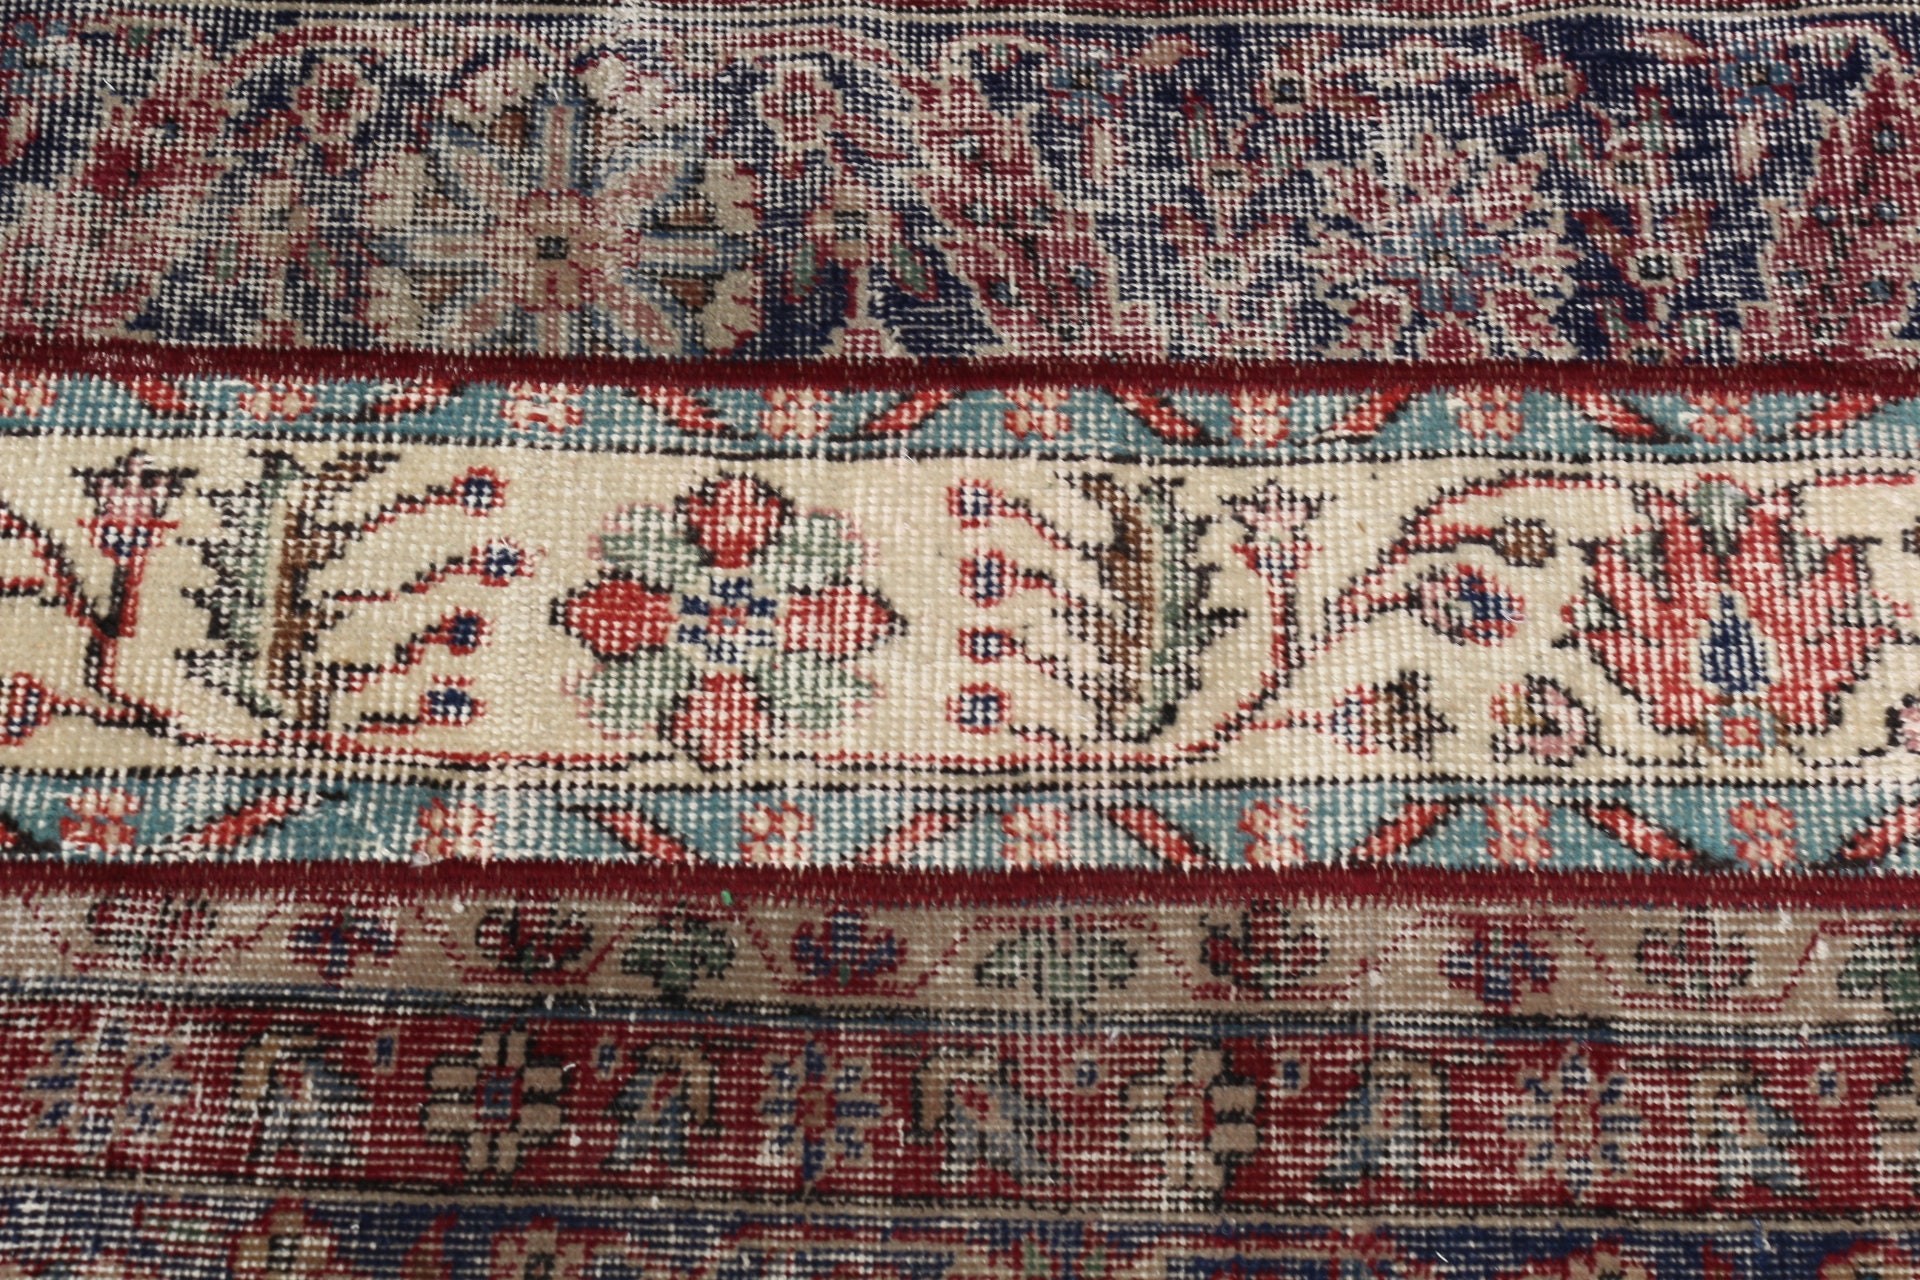 Turkish Rugs, 1.8x3.1 ft Small Rug, Car Mat Rug, Bathroom Rug, Rugs for Entry, Moroccan Rugs, Vintage Rug, Oriental Rugs, Blue Kitchen Rug